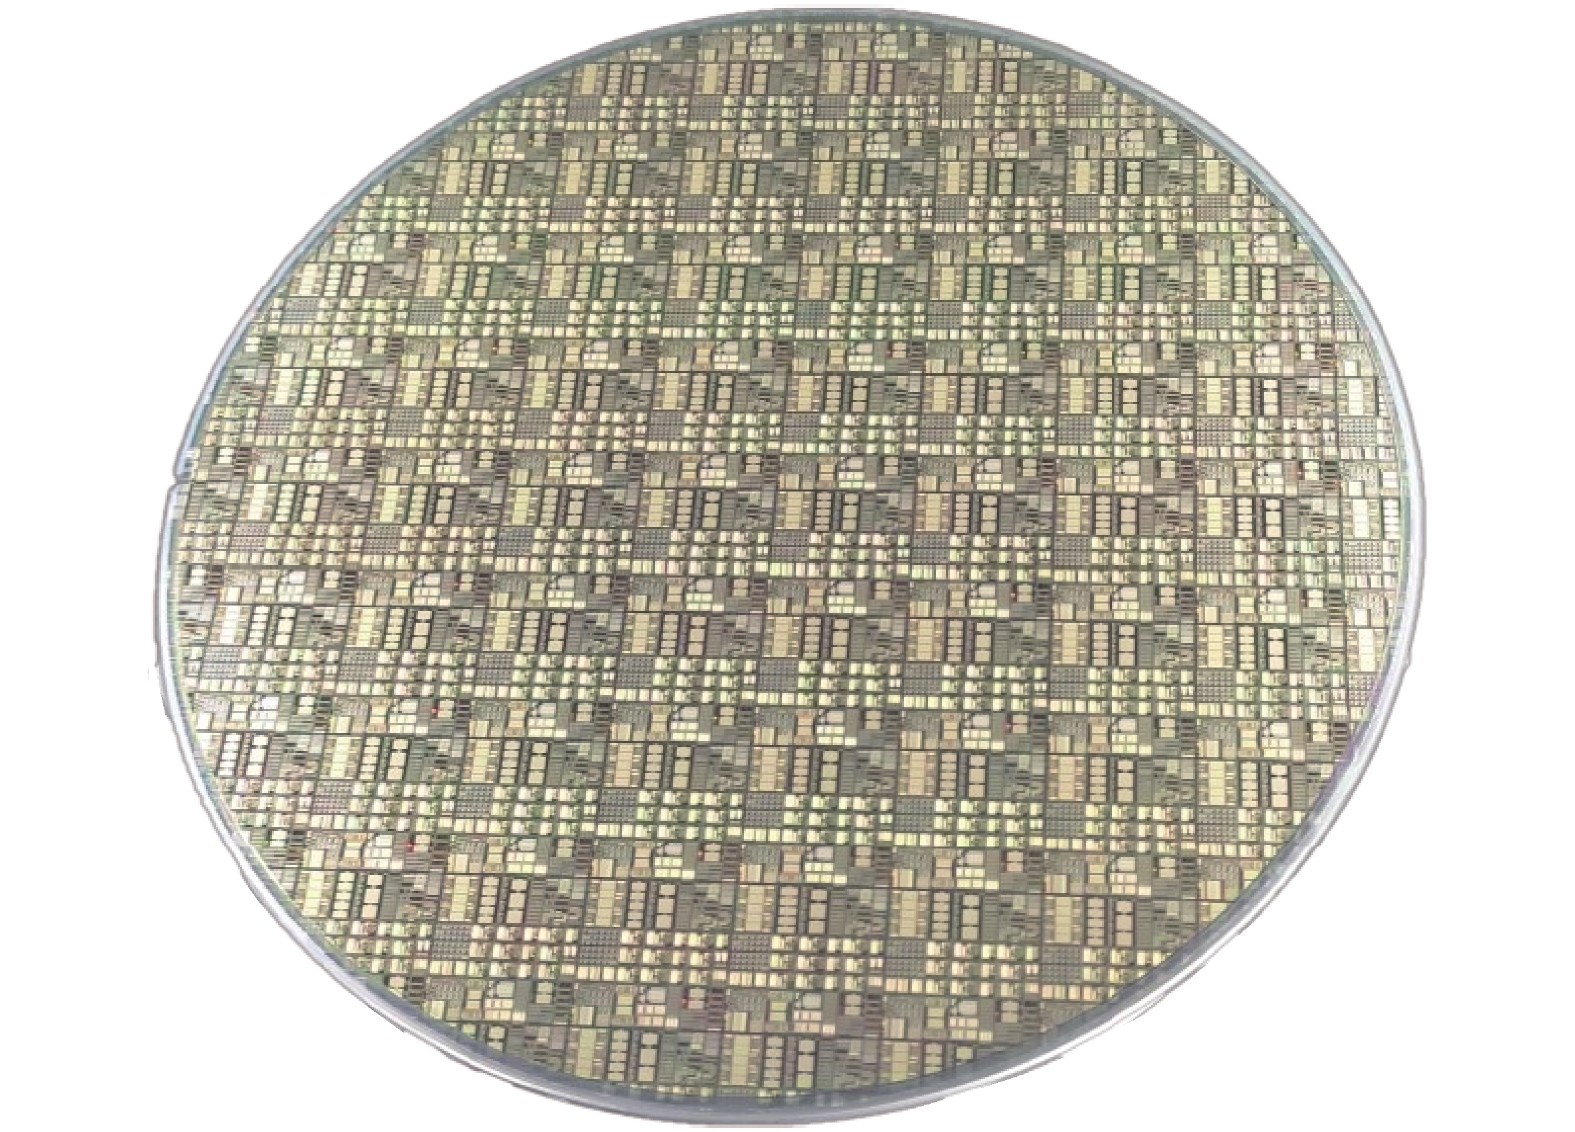 (Color online) Fabricated 200 mm GaN-on-SOI wafer with CMOS-compatible processing.